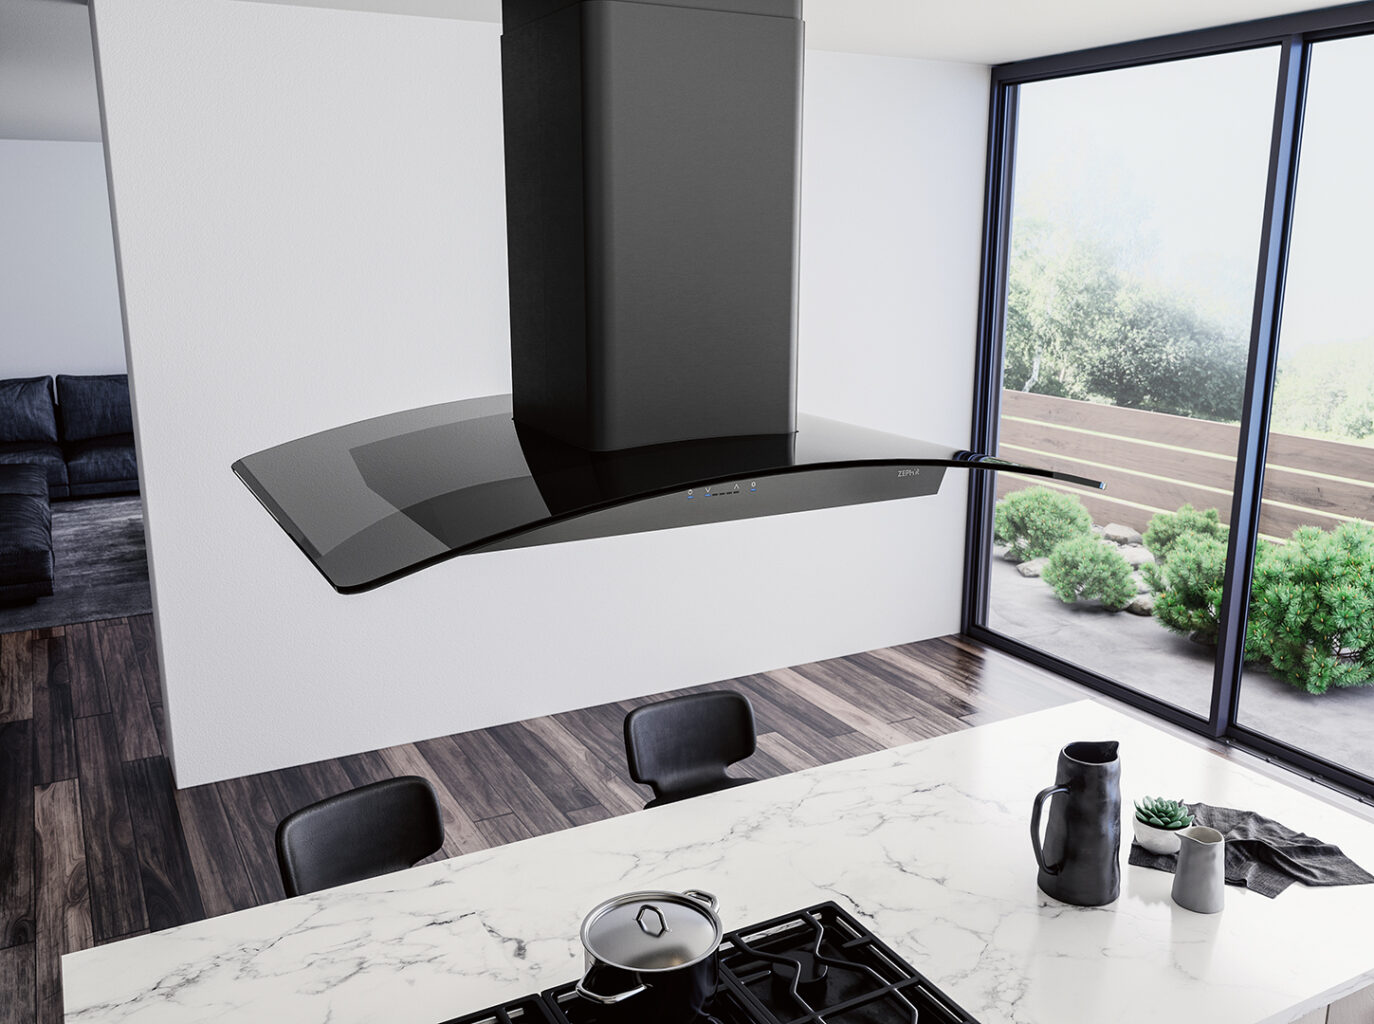 Personalize a Kitchen Hood and Wine Cooler with Zephyr!